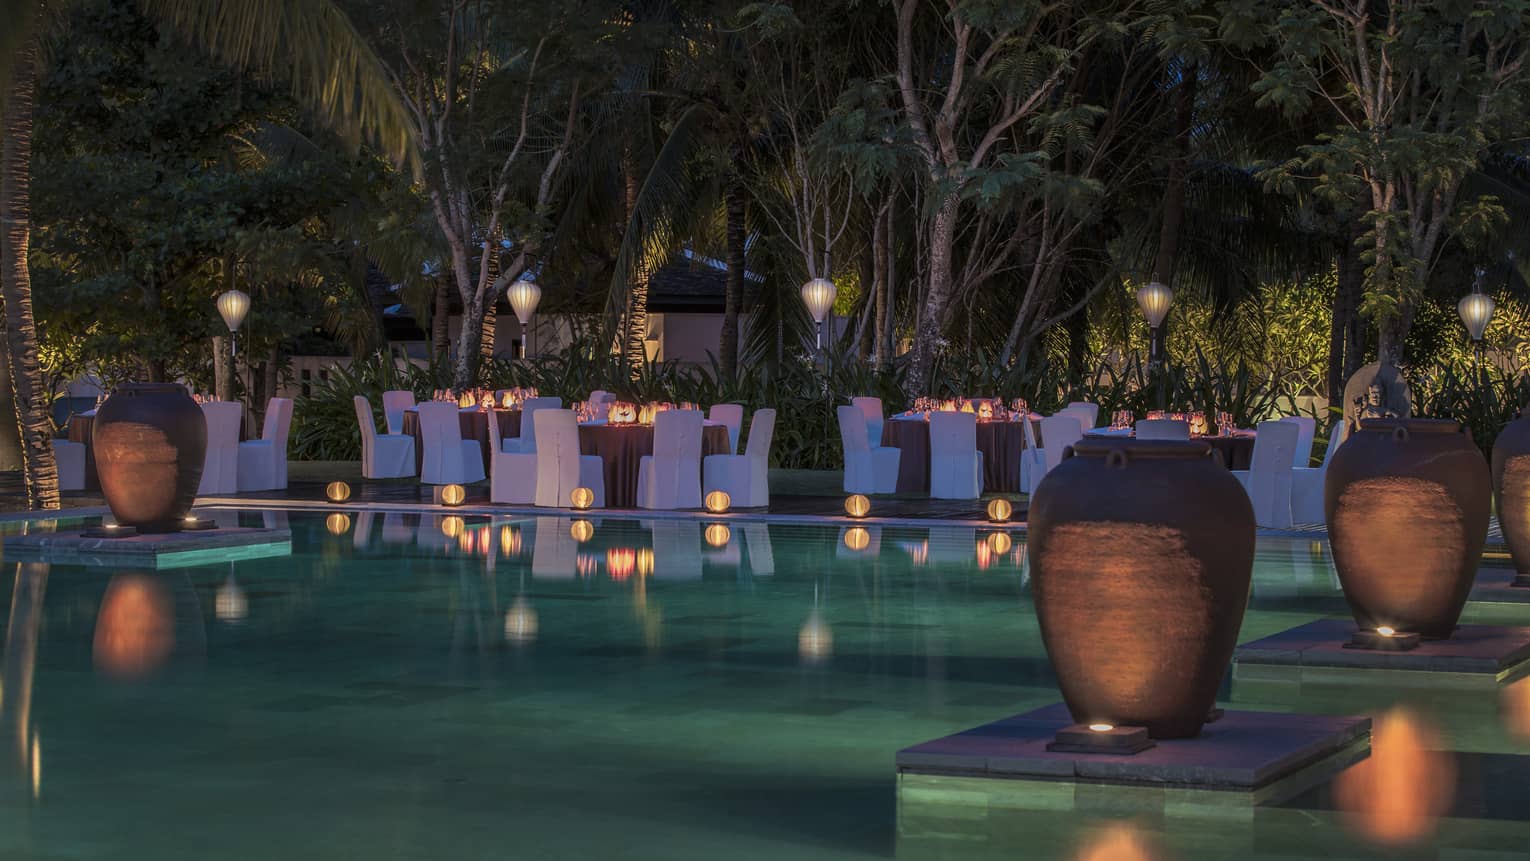 Tables and chairs with blue covers surround pool at night, surrounded by lanterns and vases